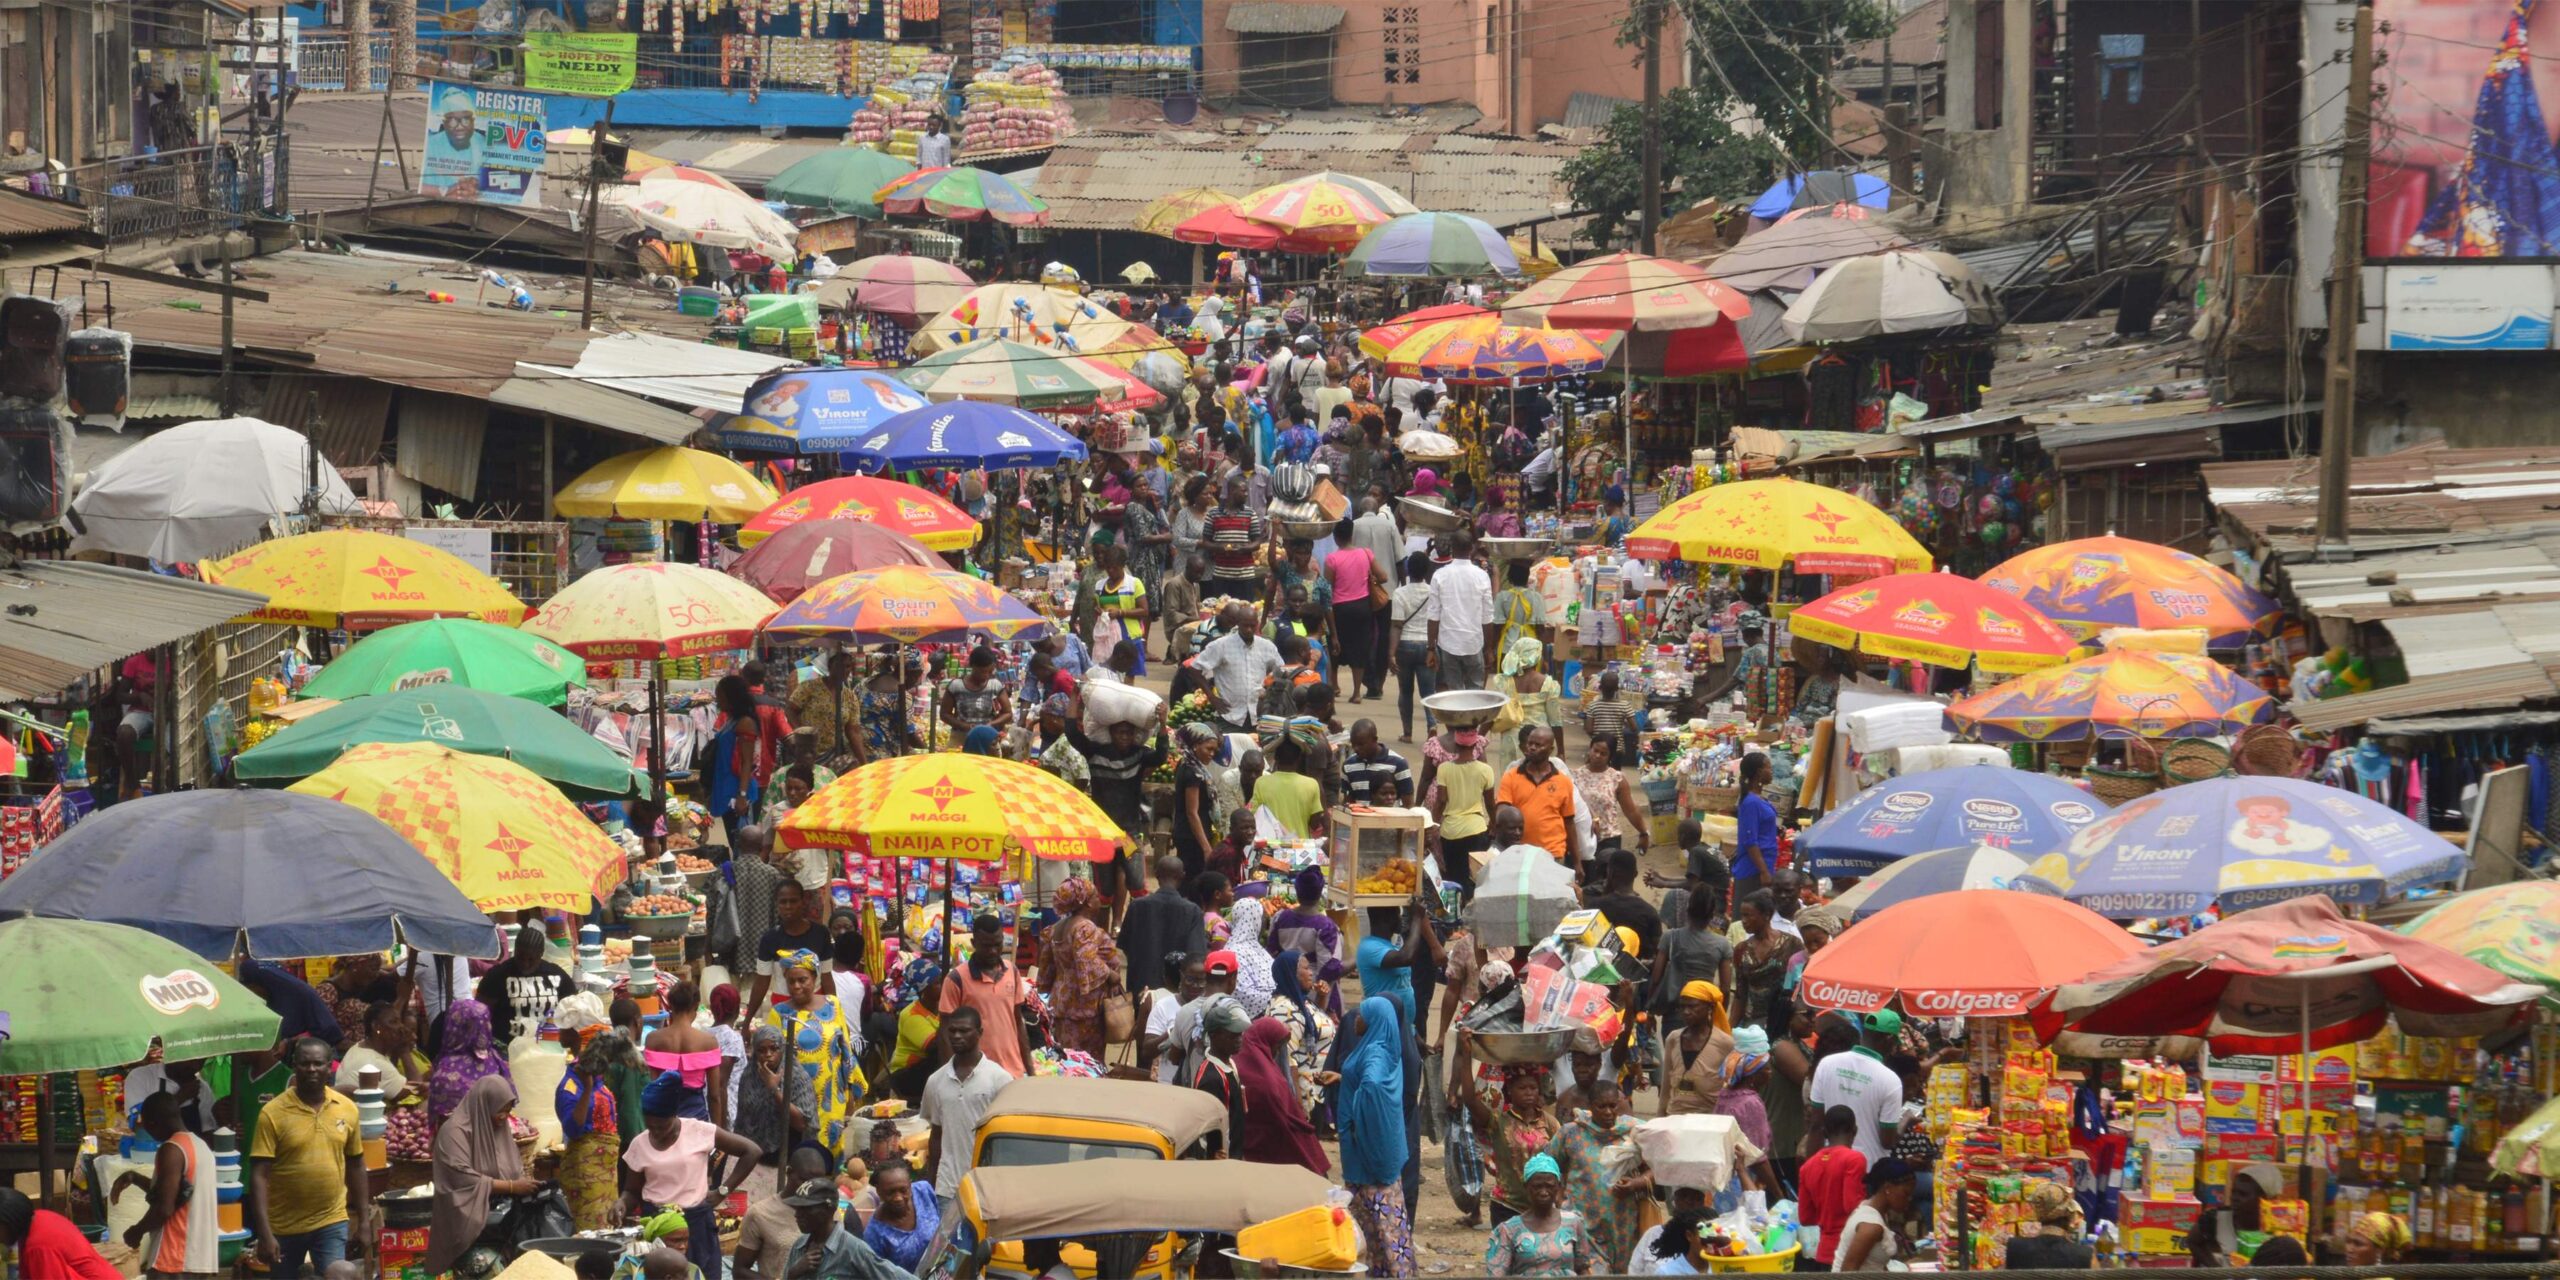 A busy market in Lagos, Nigeria with umbrellas and a very crowded street